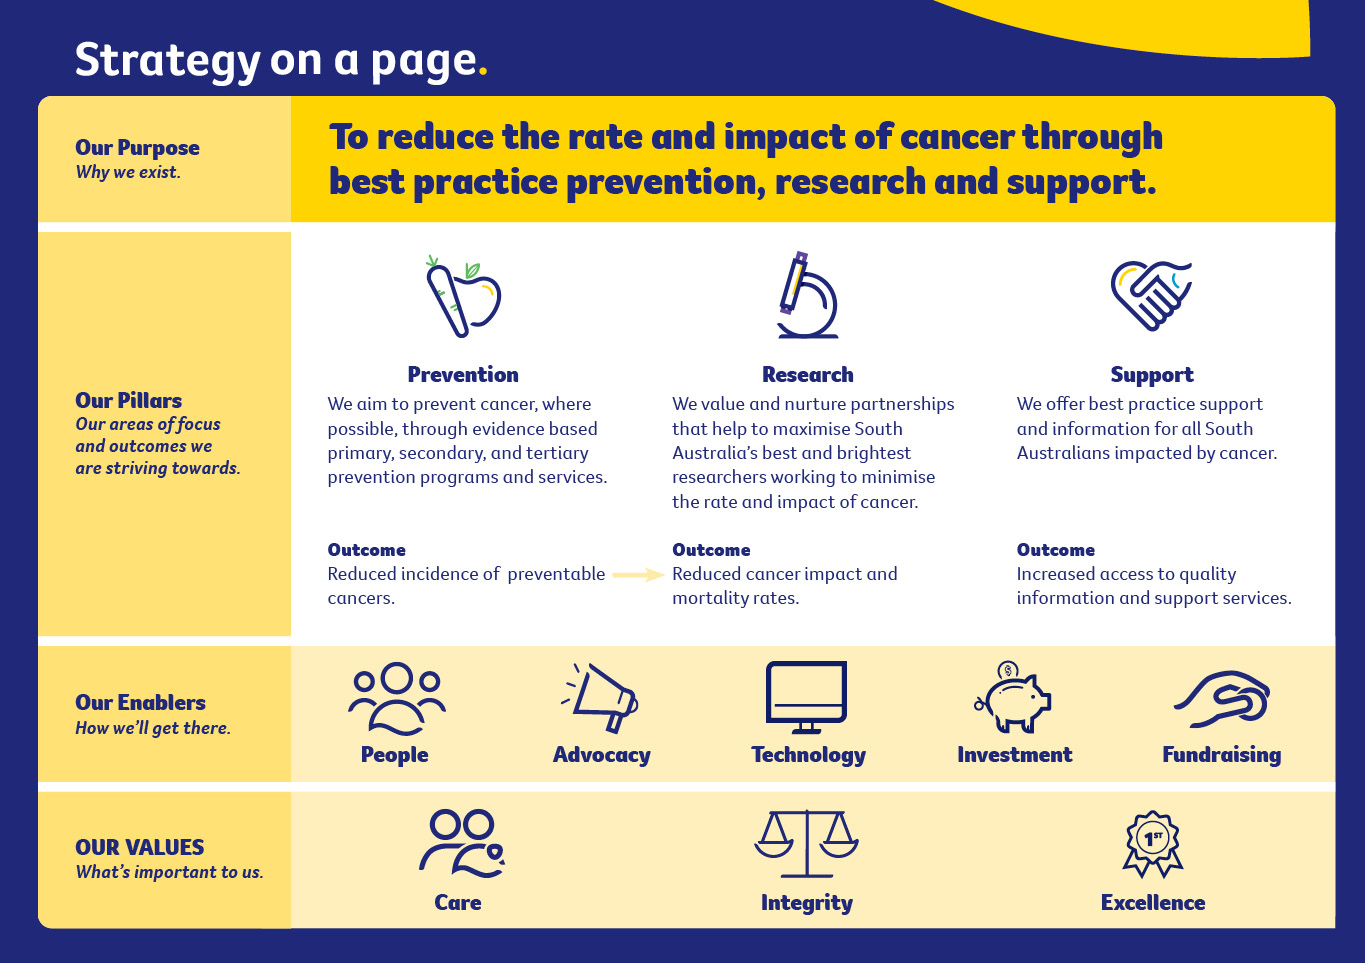 Cancer Council SA Strategy on a page